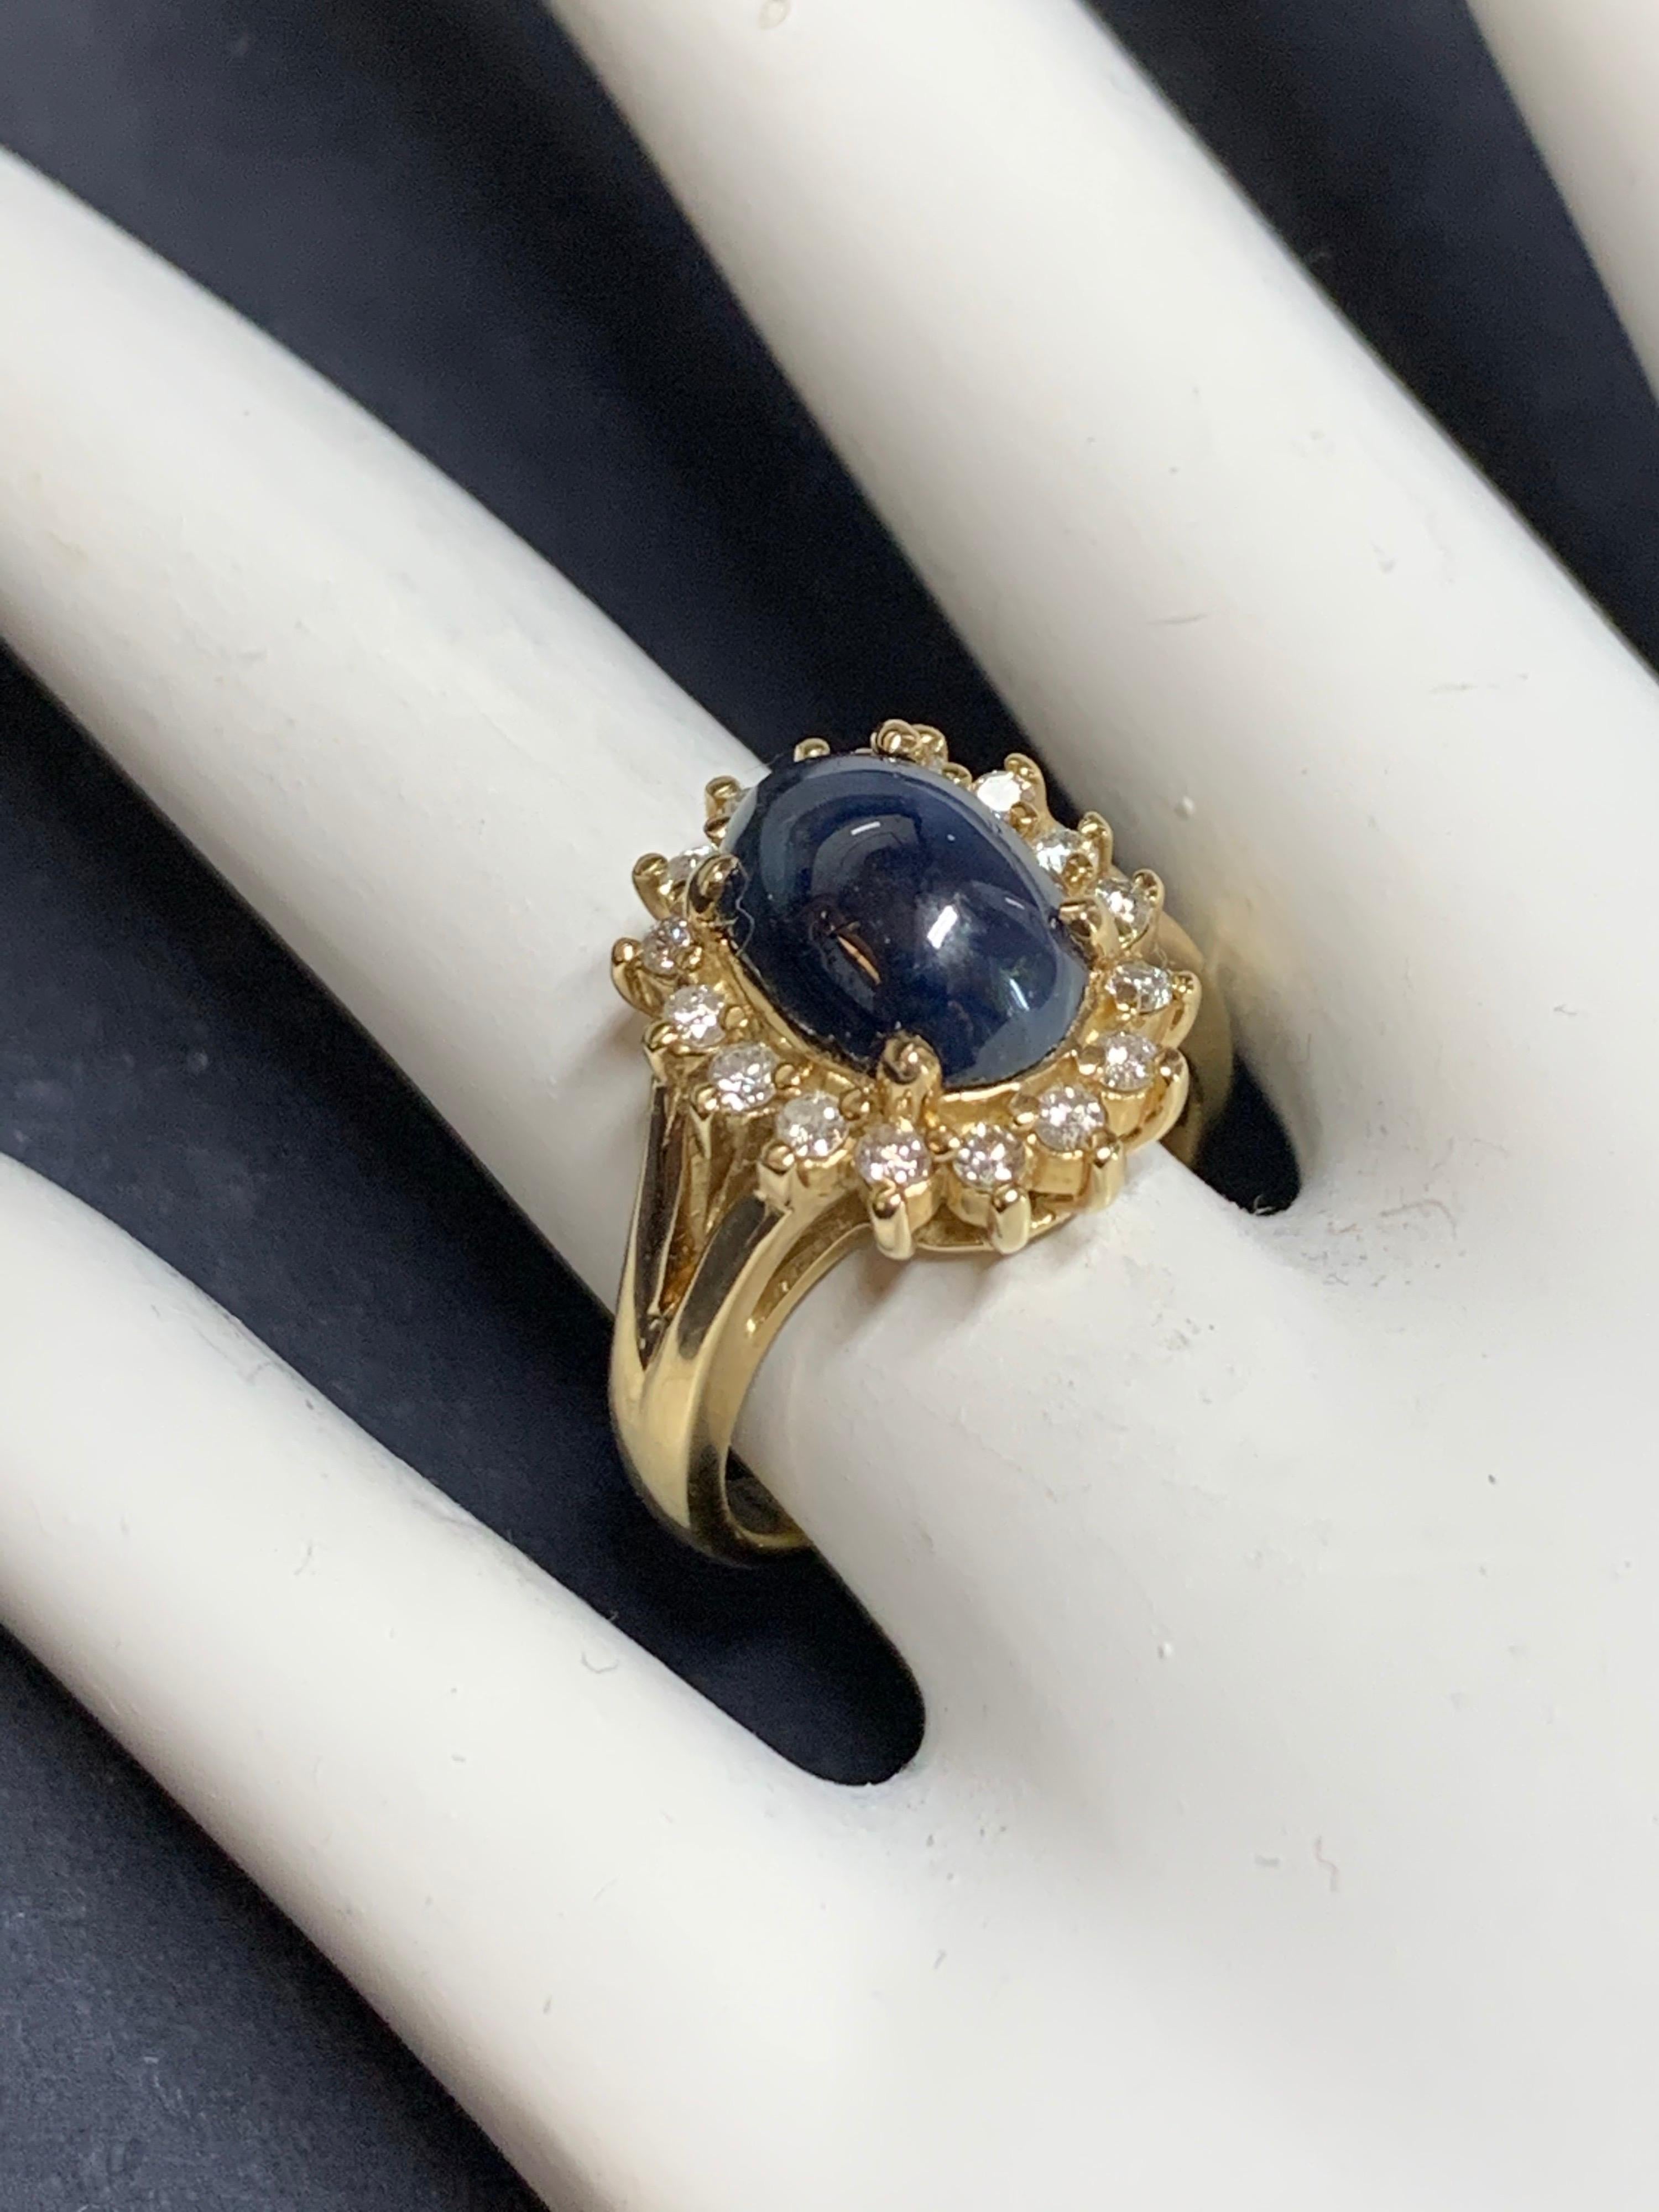 Cabochon Retro Gold Cocktail Ring 4.50 Carat Natural Blue Sapphire and Diamond circa 1960 For Sale